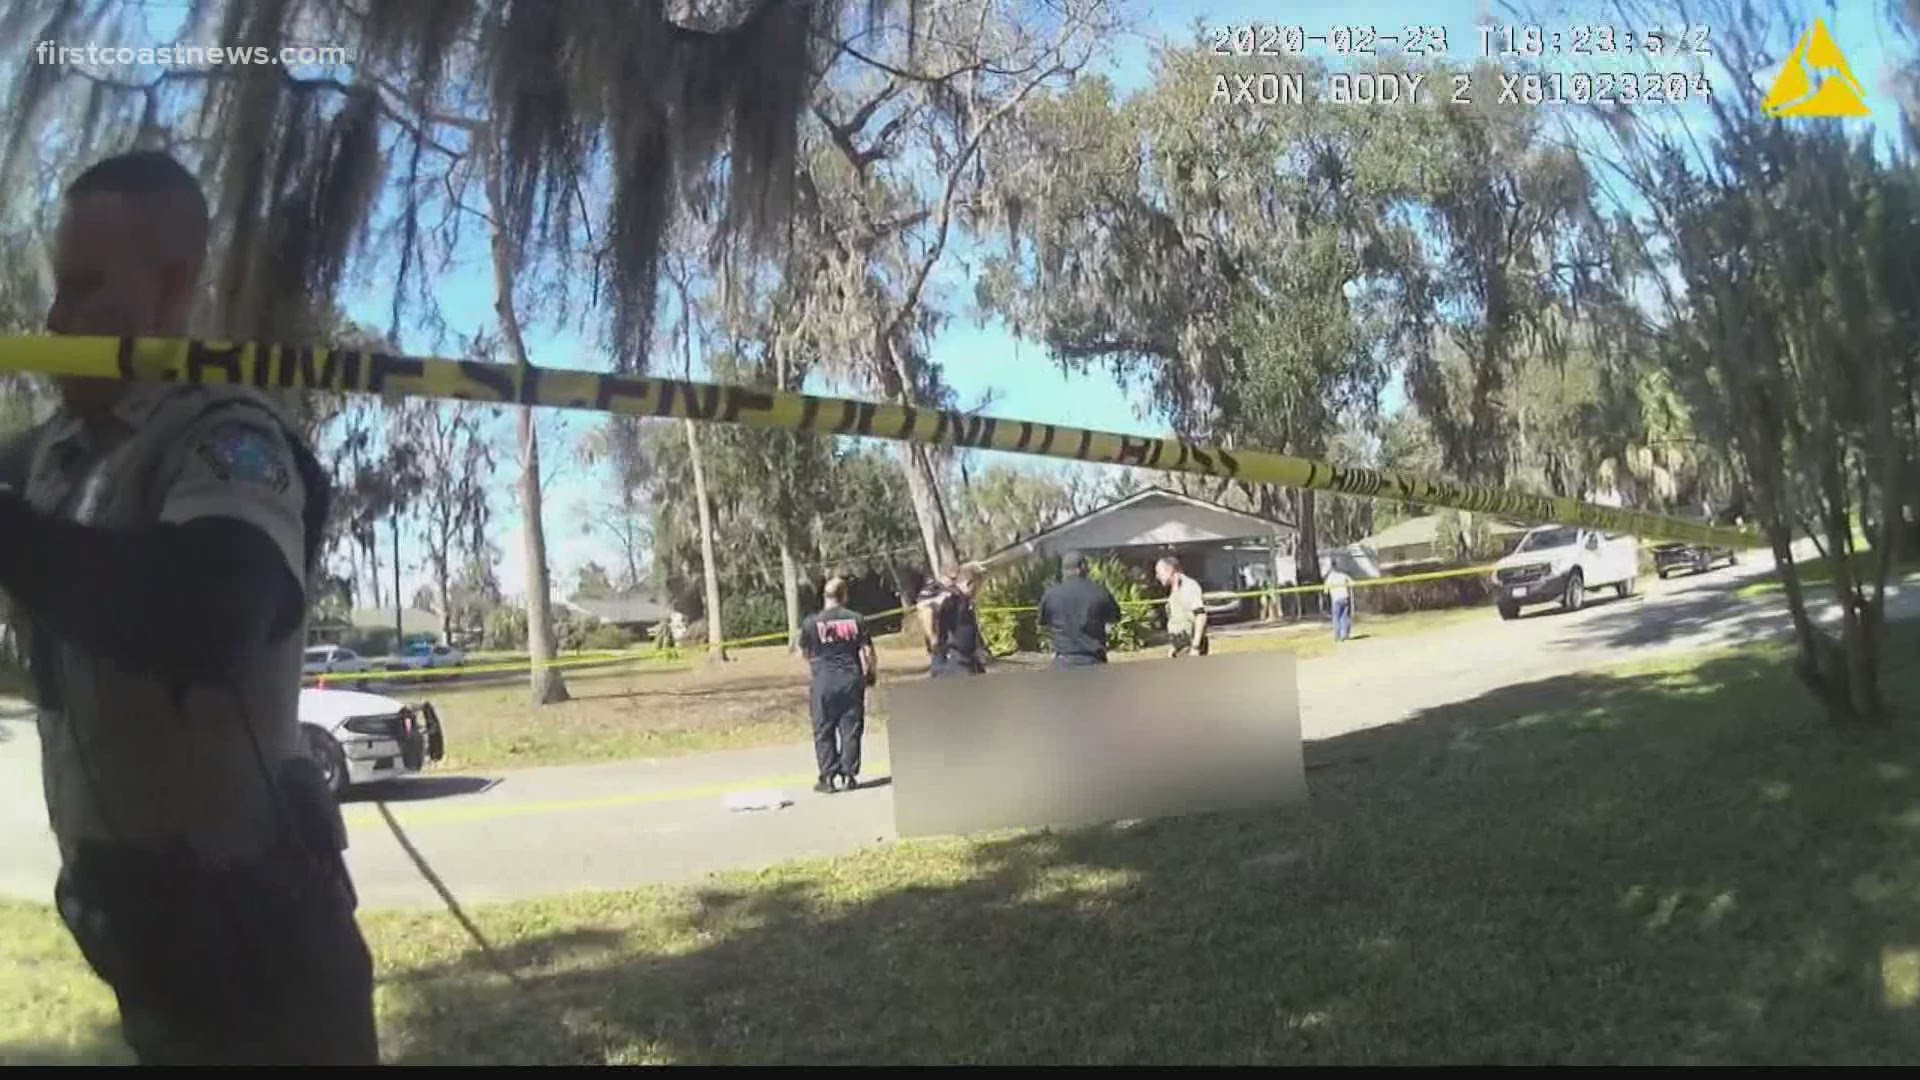 The video shows the scene from police body camera footage.